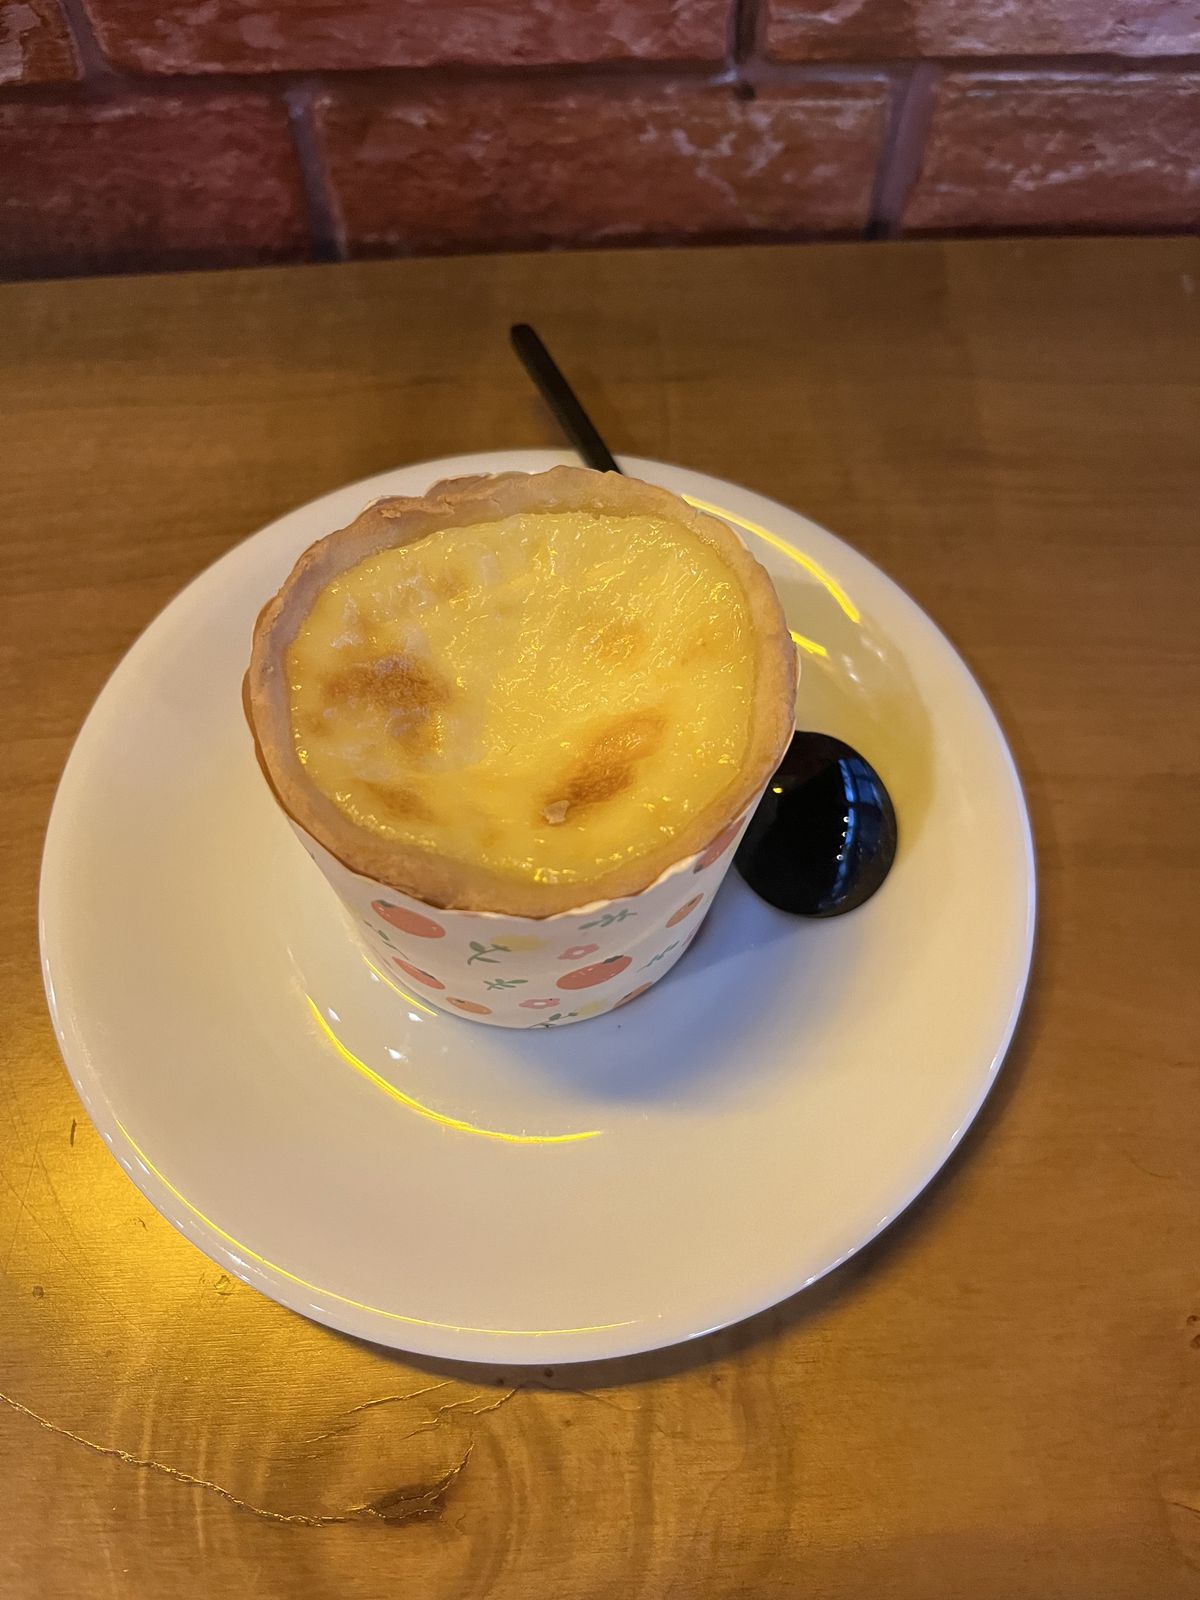 An egg tart on a plate next to a spoon.